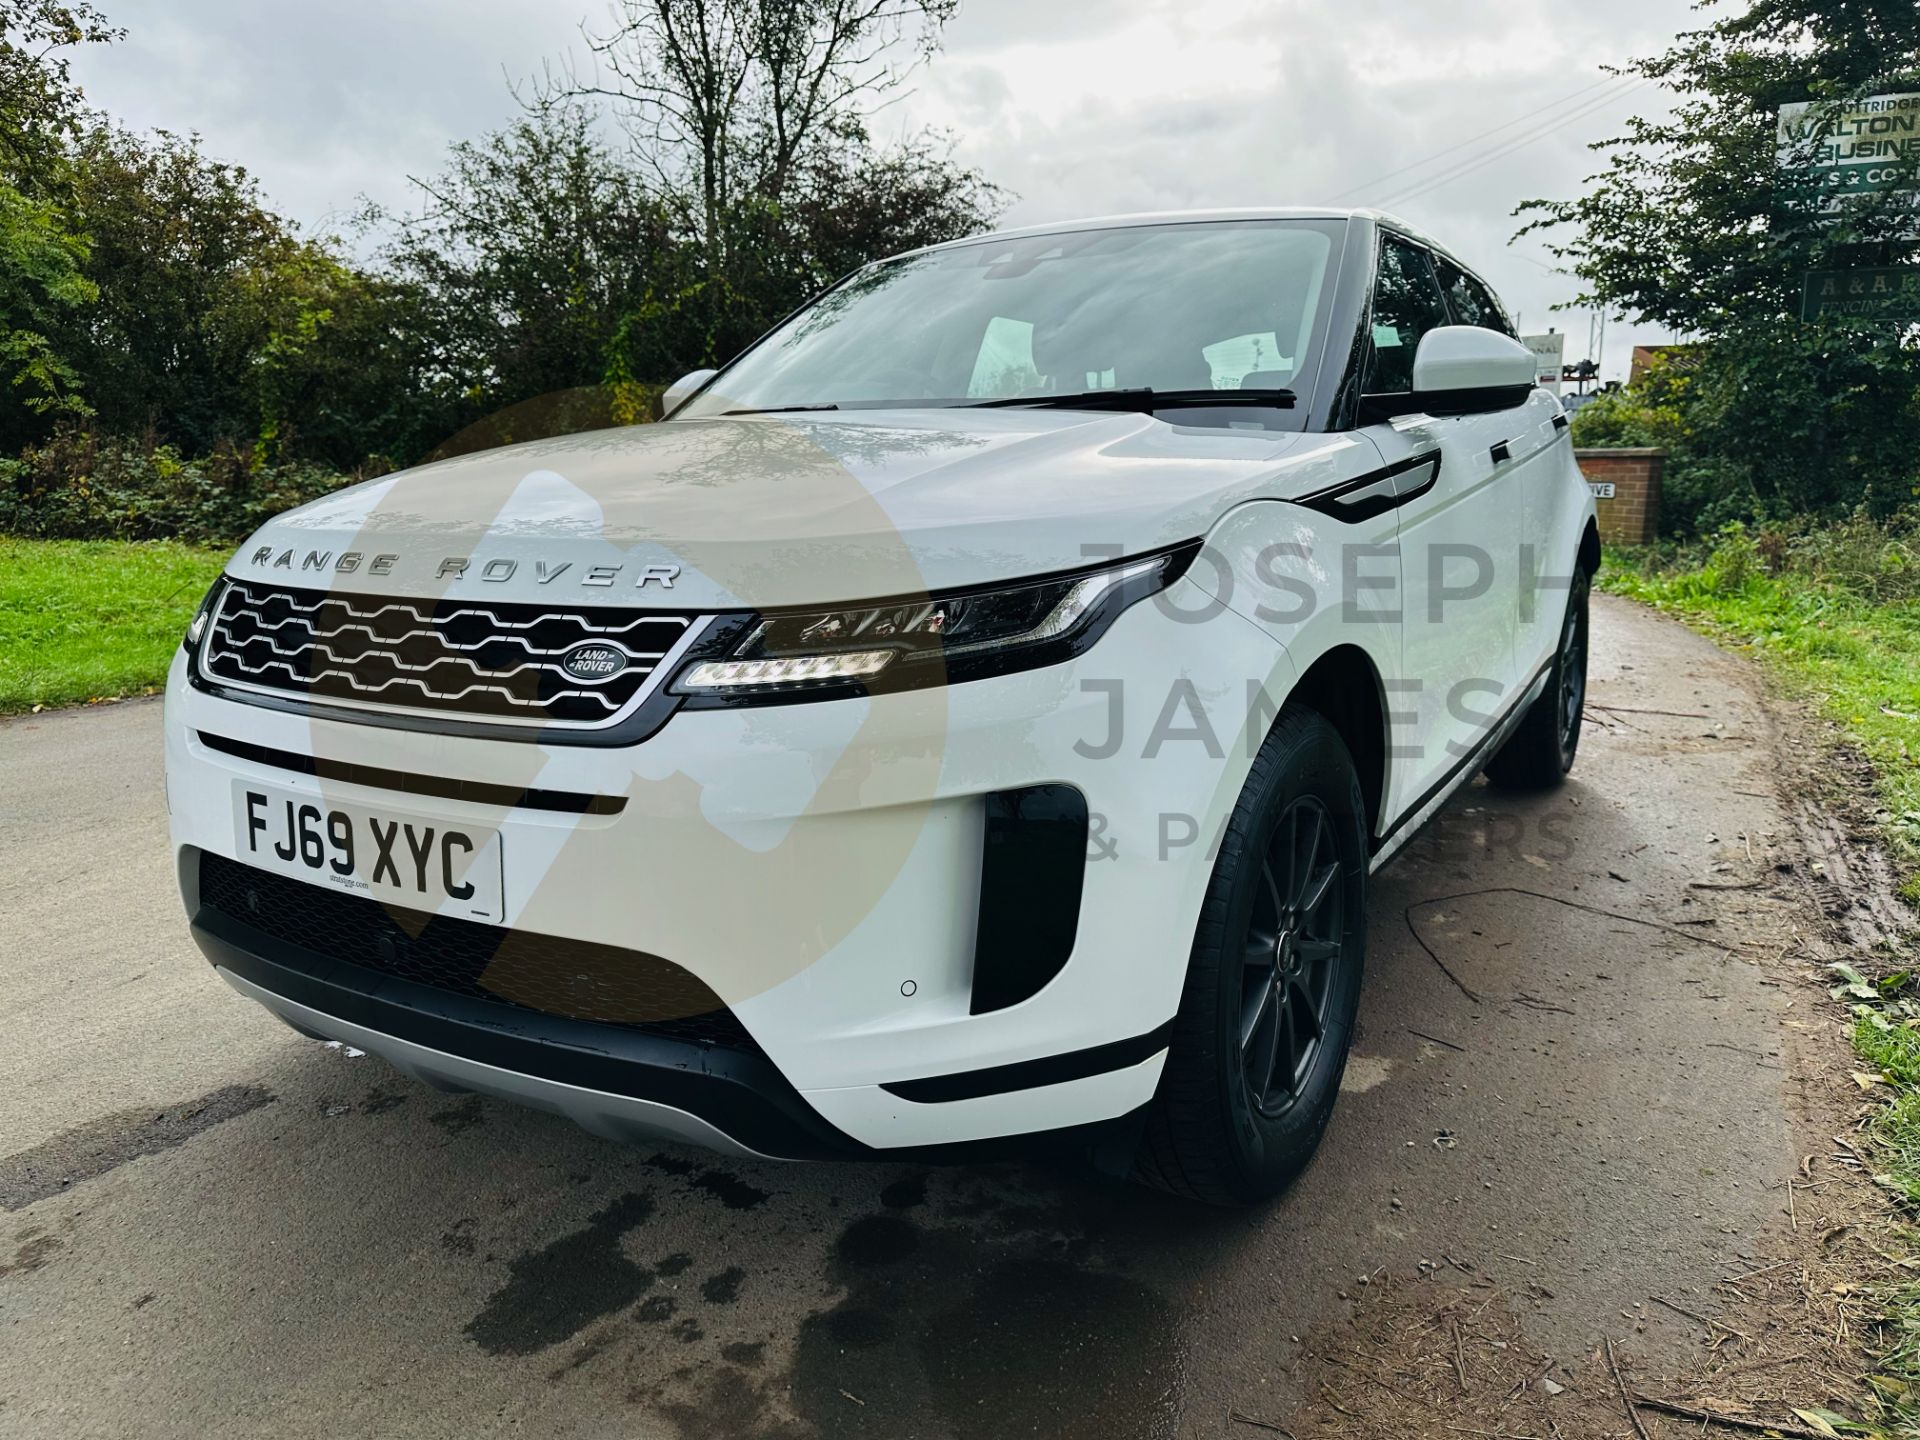 (ON SALE) LAND ROVER RANGE ROVER EVOQUE 2.0d AUTO-START STOP (2020 MODEL) ONLY 33K MILES FROM NEW - Image 5 of 41